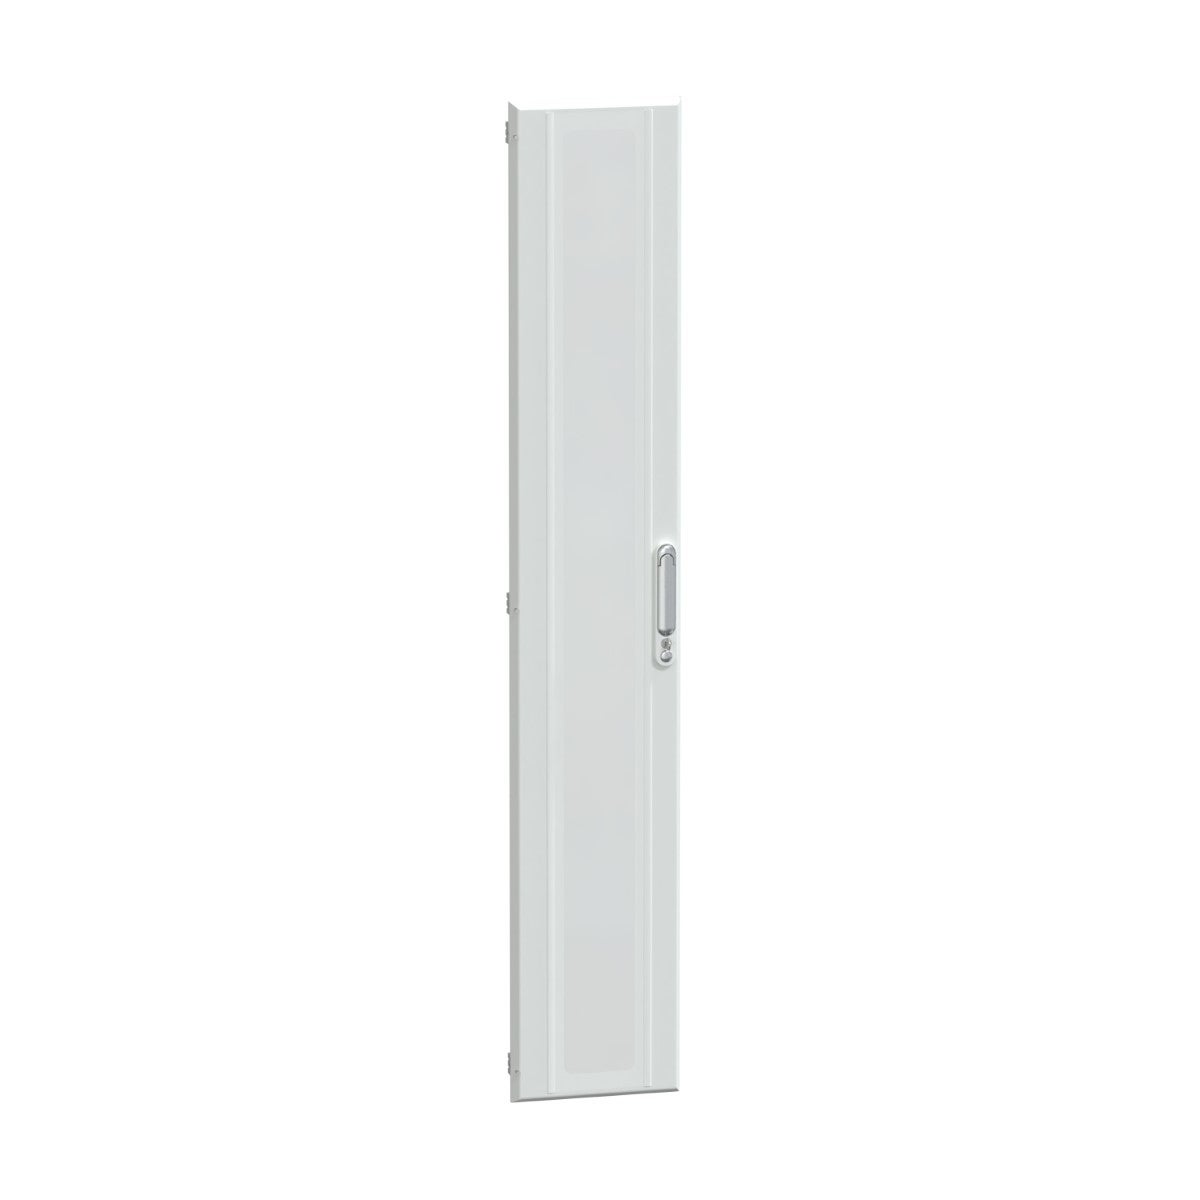 Door, PrismaSeT G, transparent type for duct, 33M, W300, IP30, white, RAL 9003